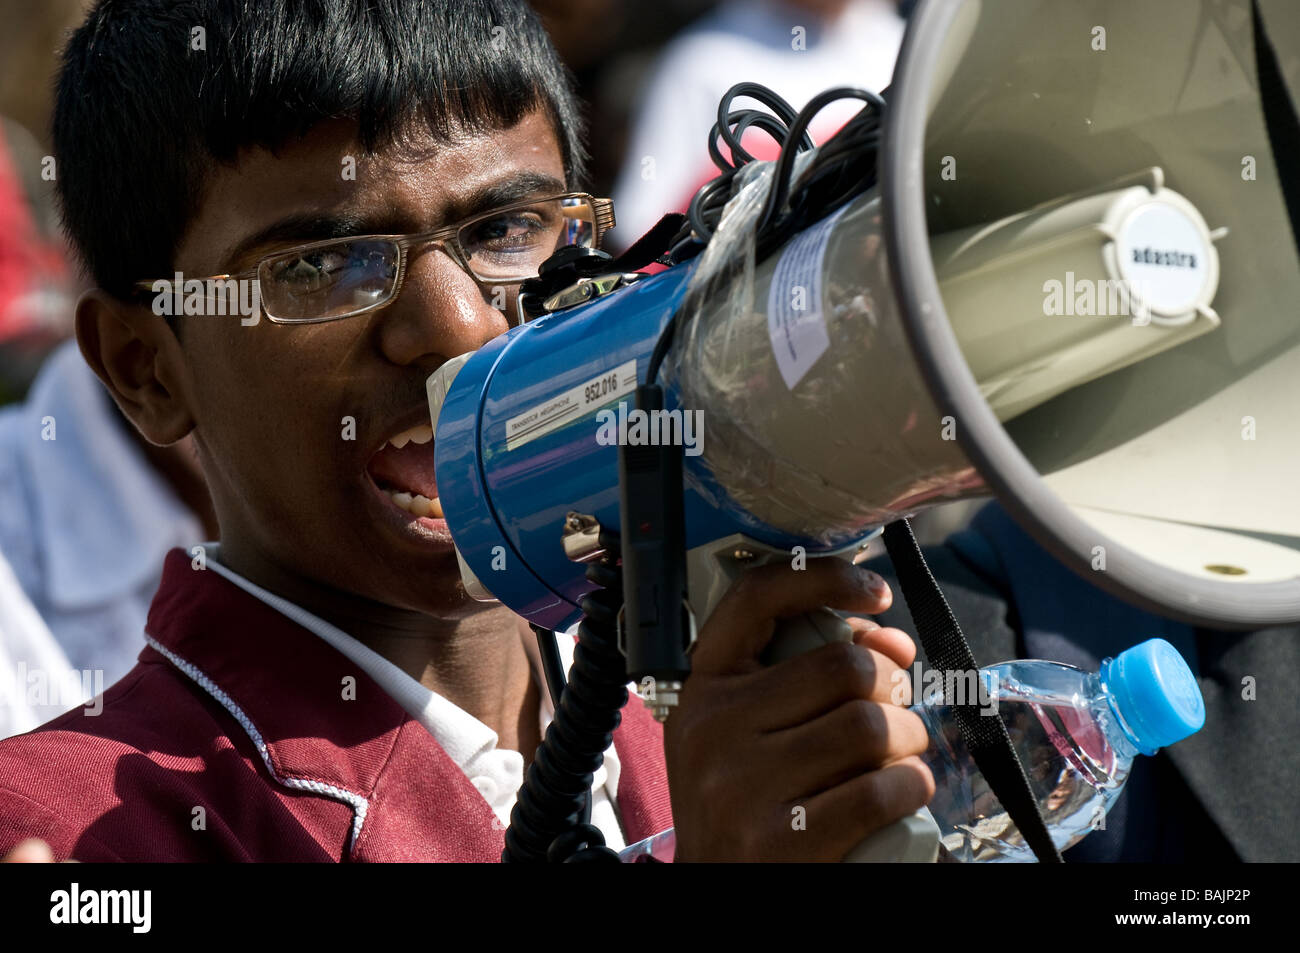 A Tamil student shouting slogans through a megaphone at a demonstration in London. Stock Photo